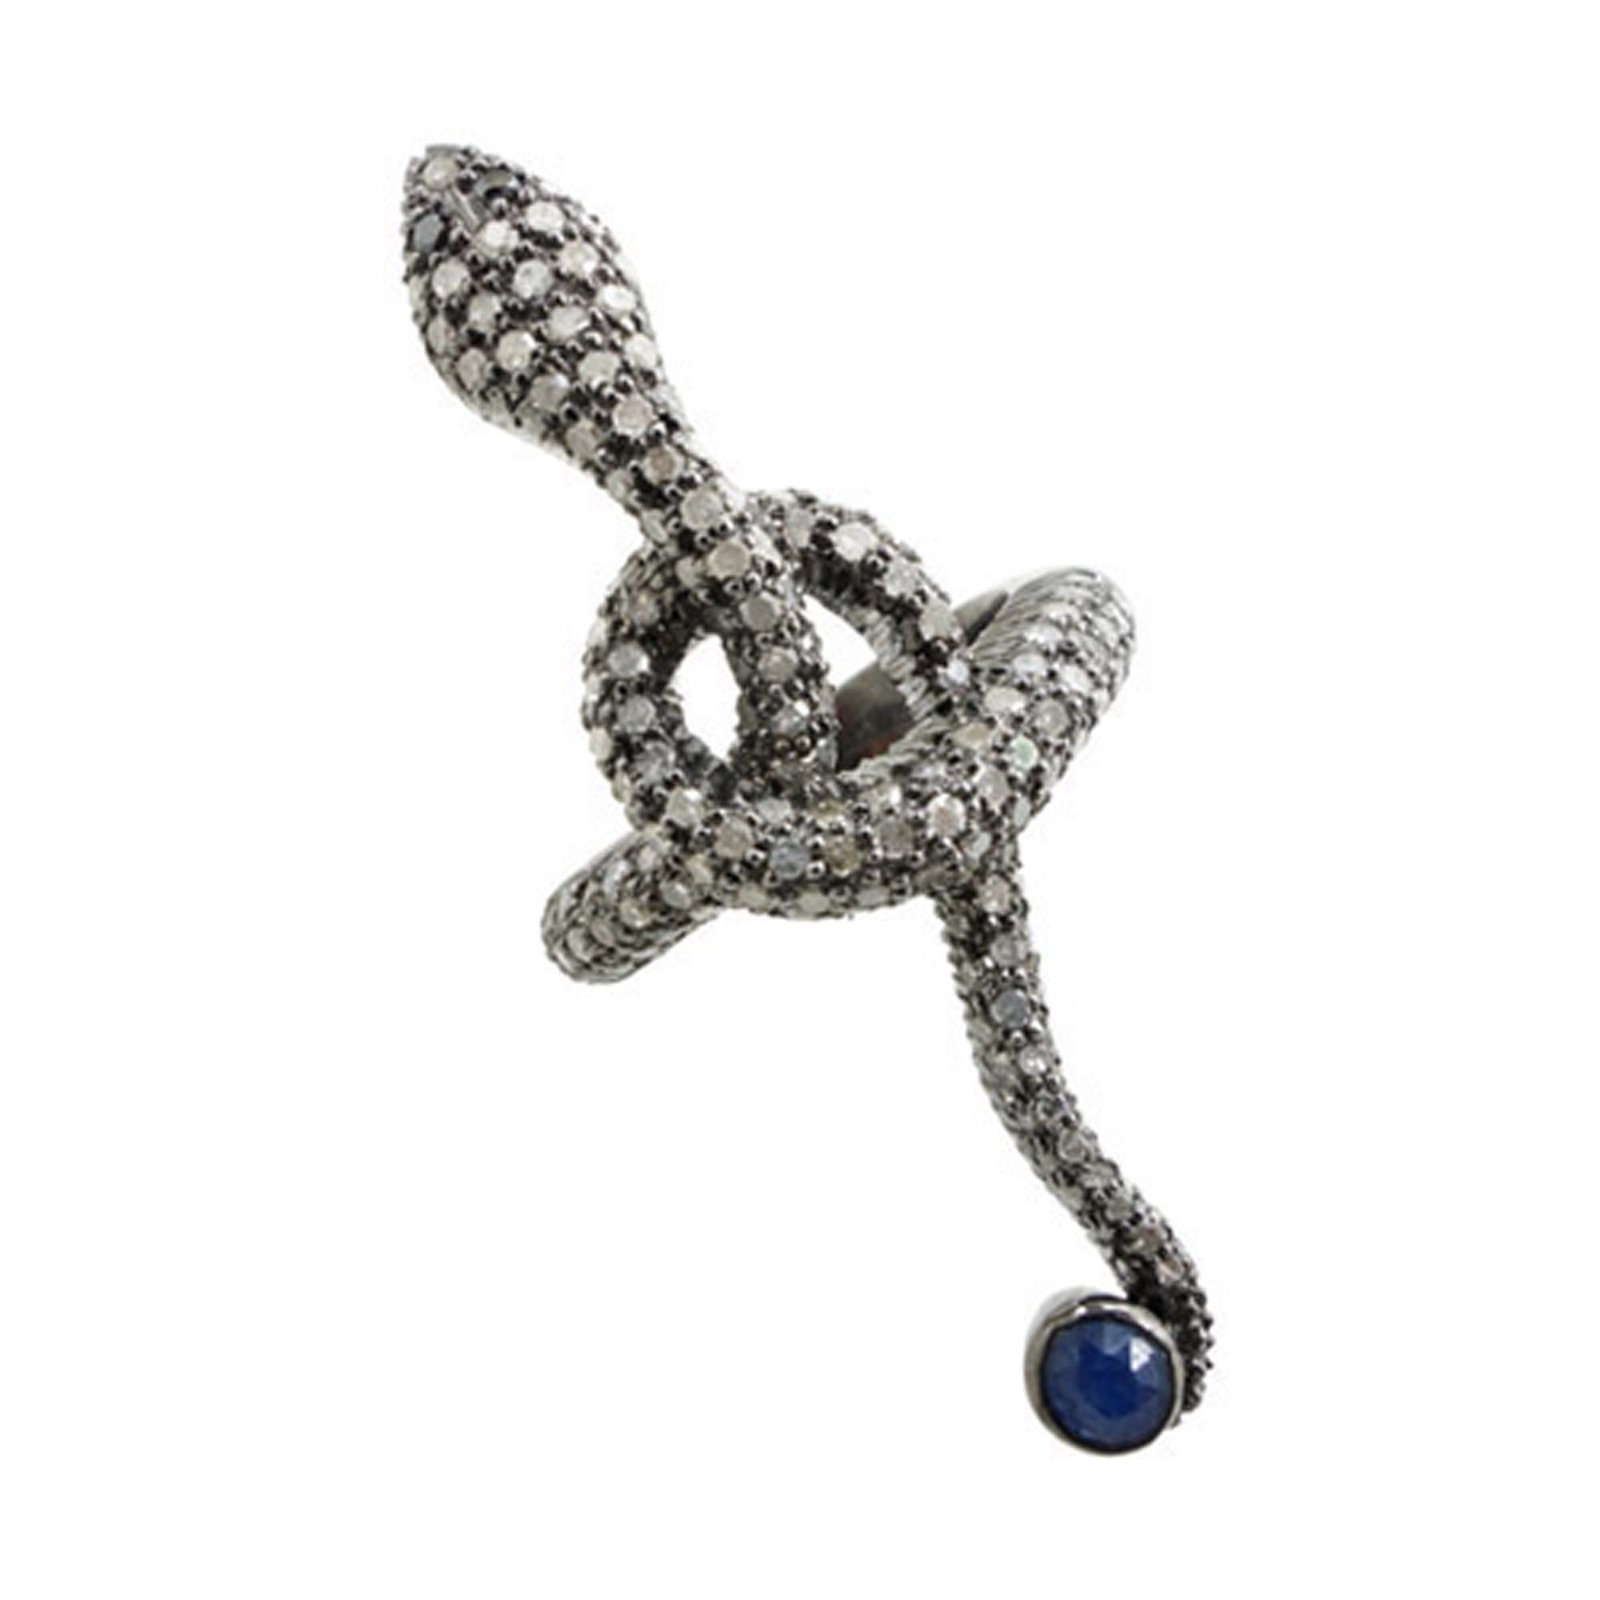 Snake shape ring made in 925 silver with diamond & sapphire